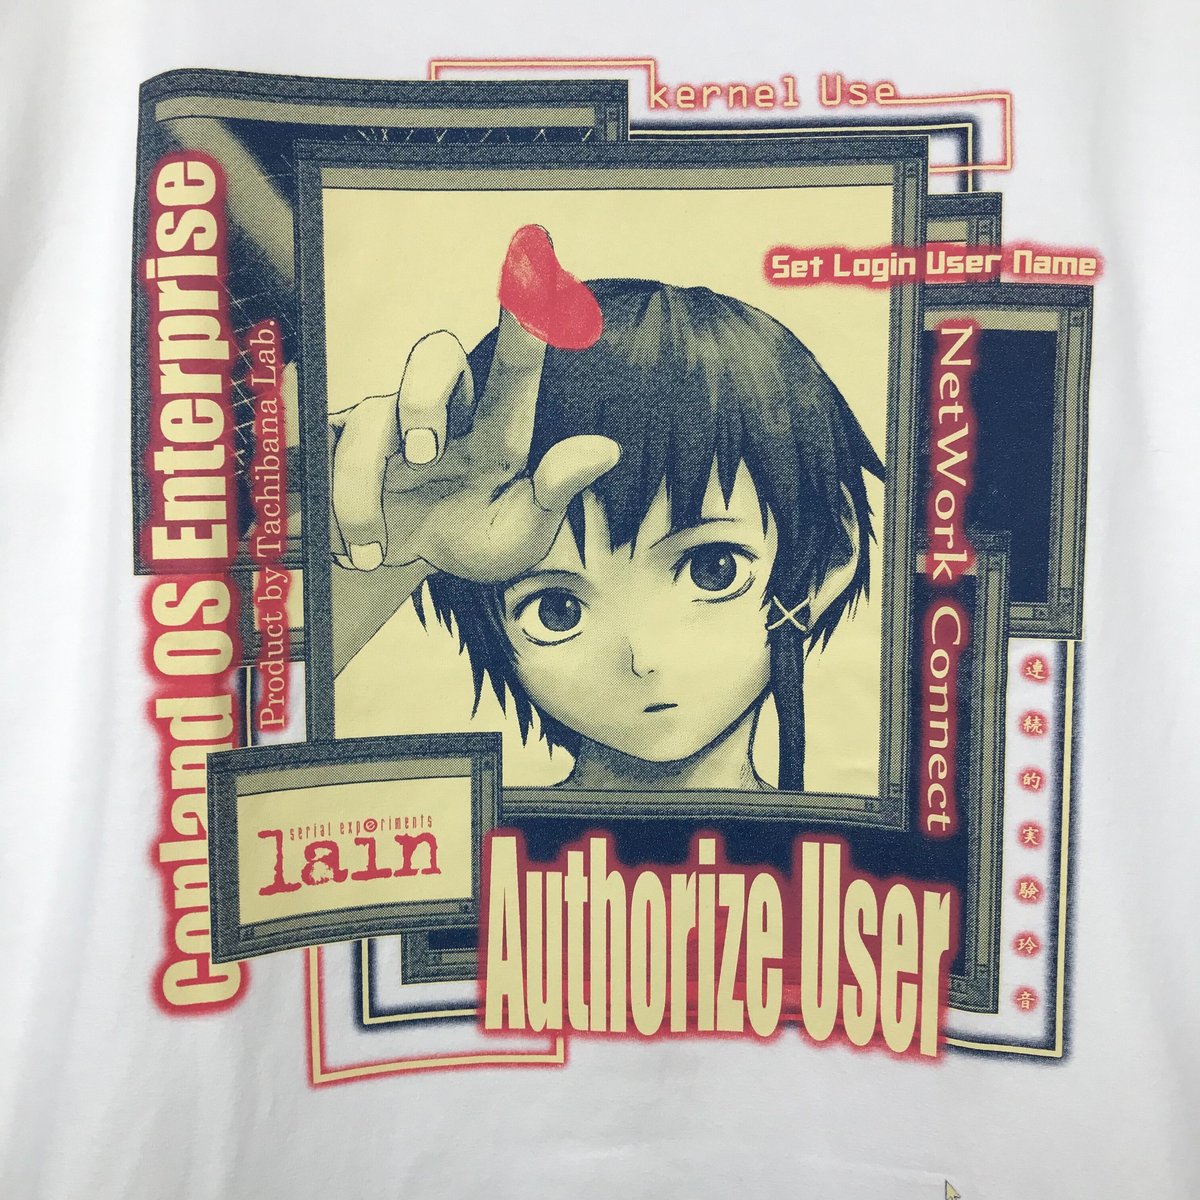 serial experiments lain レイン ポスター４枚セット